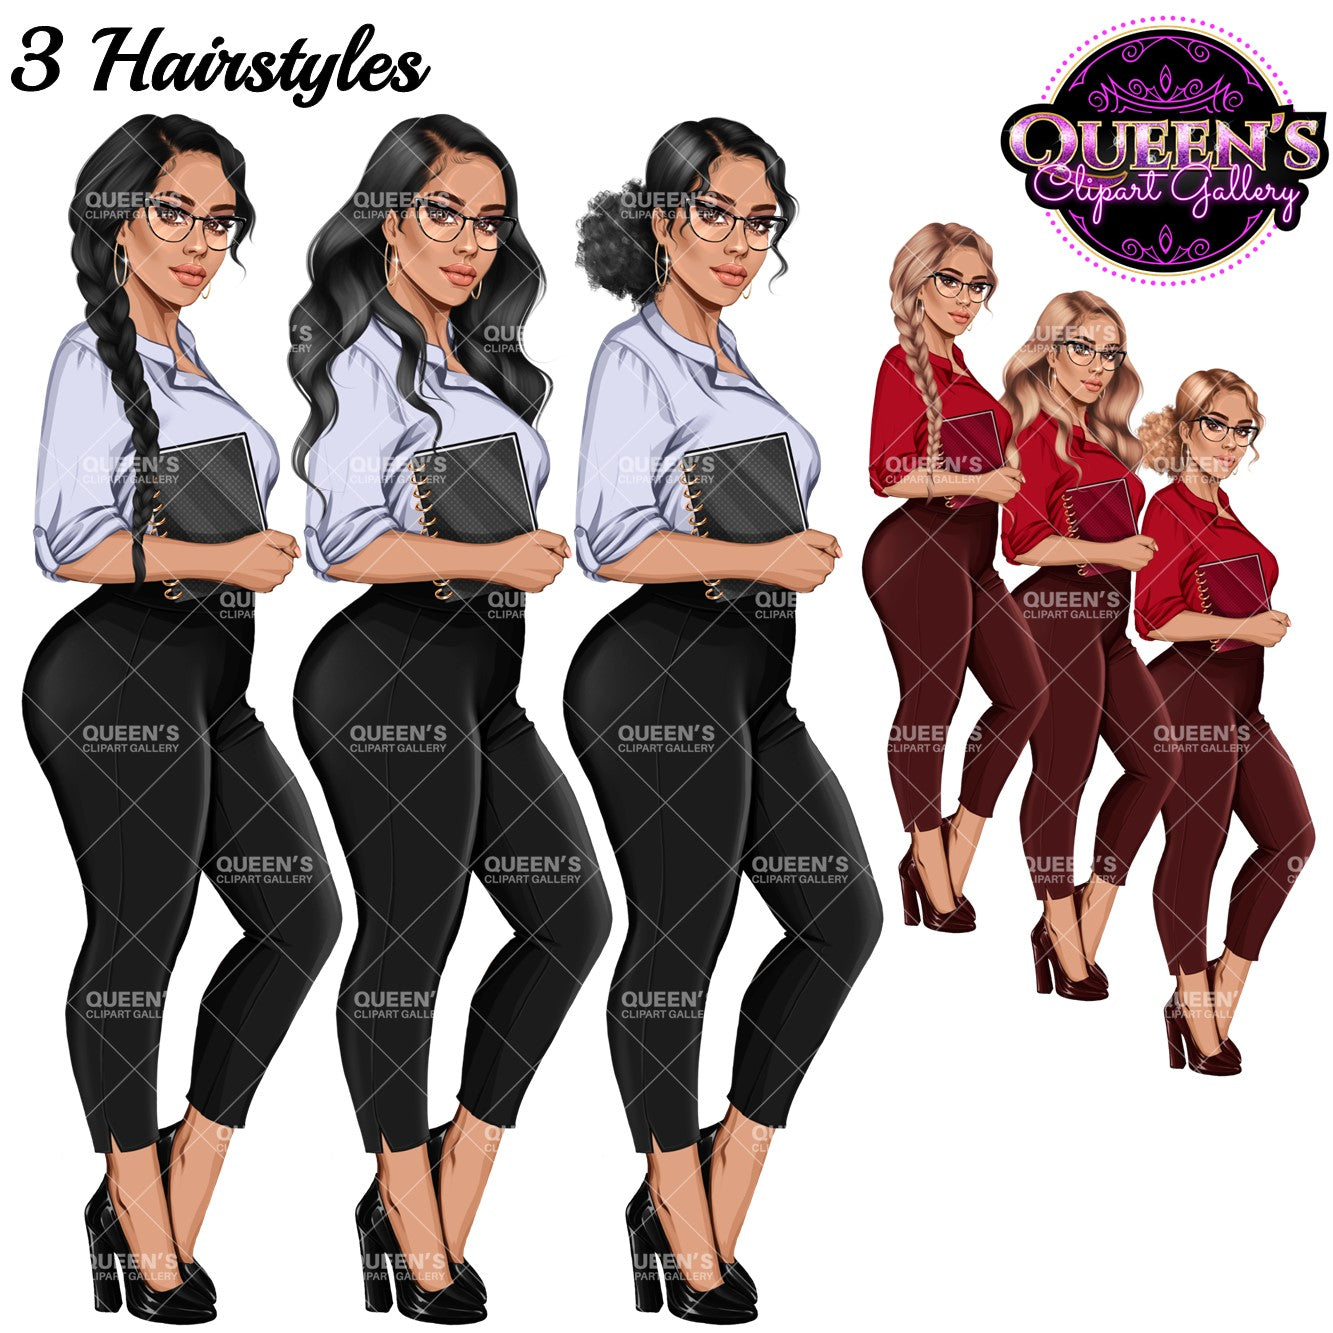 Planner girl clipart, Lady boss clipart, Curvy girl clipart, Fashion girl clipart, Teacher clipart, Woman clipart, Planner woman, Boss girl